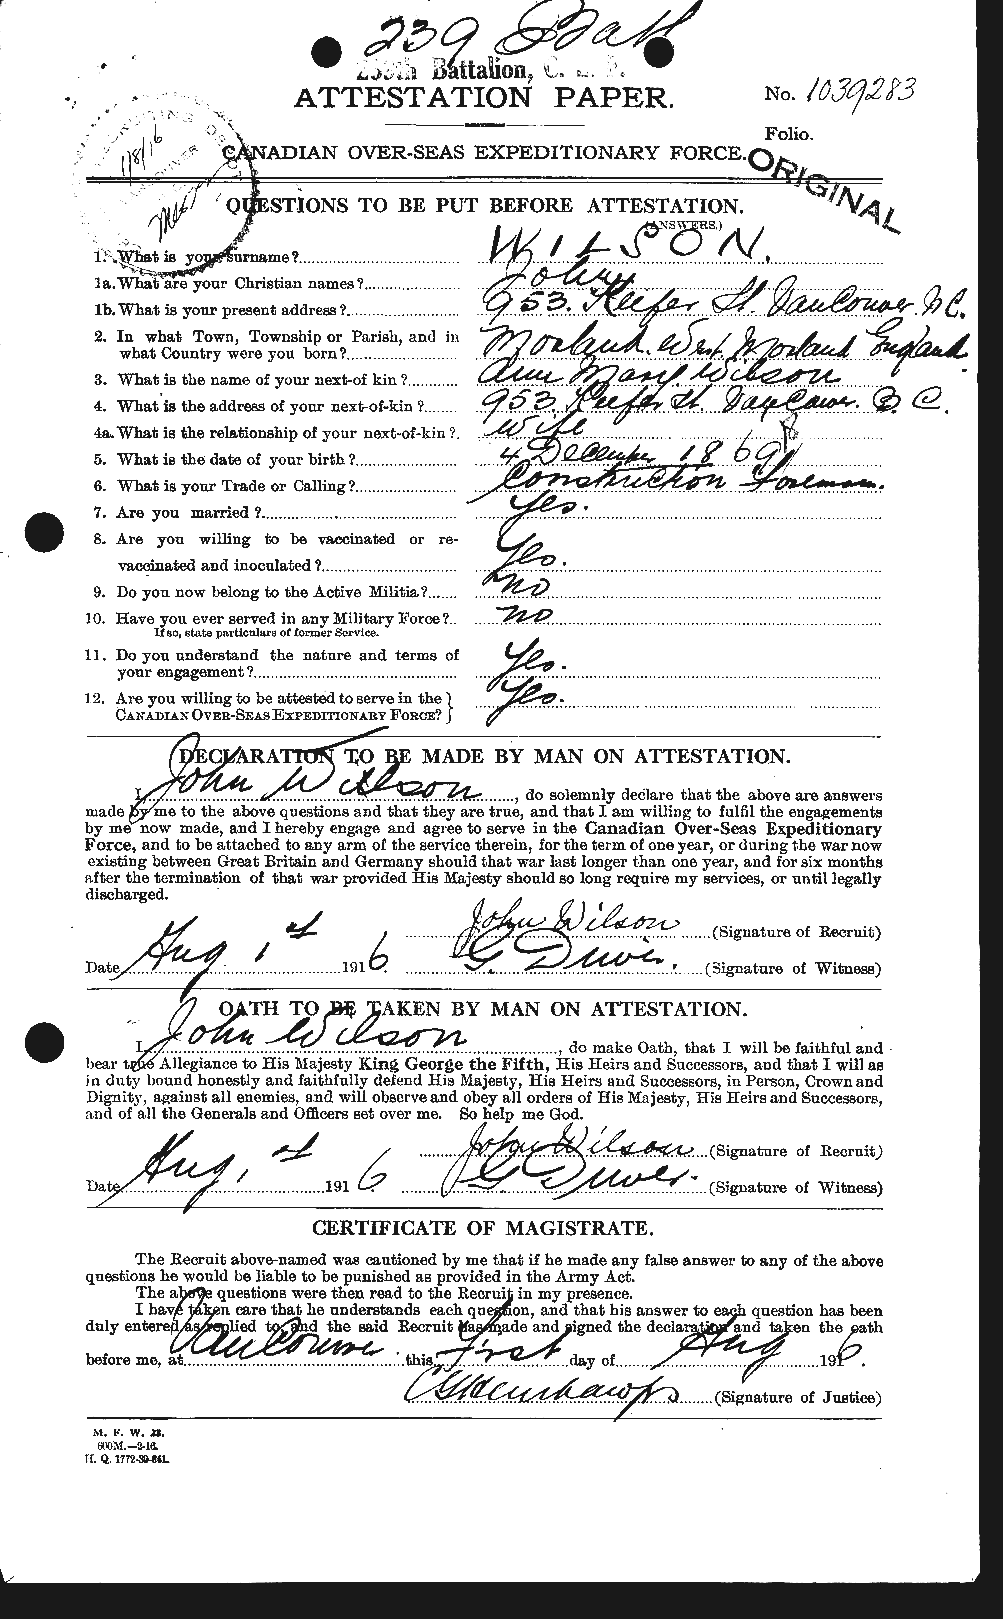 Personnel Records of the First World War - CEF 681599a